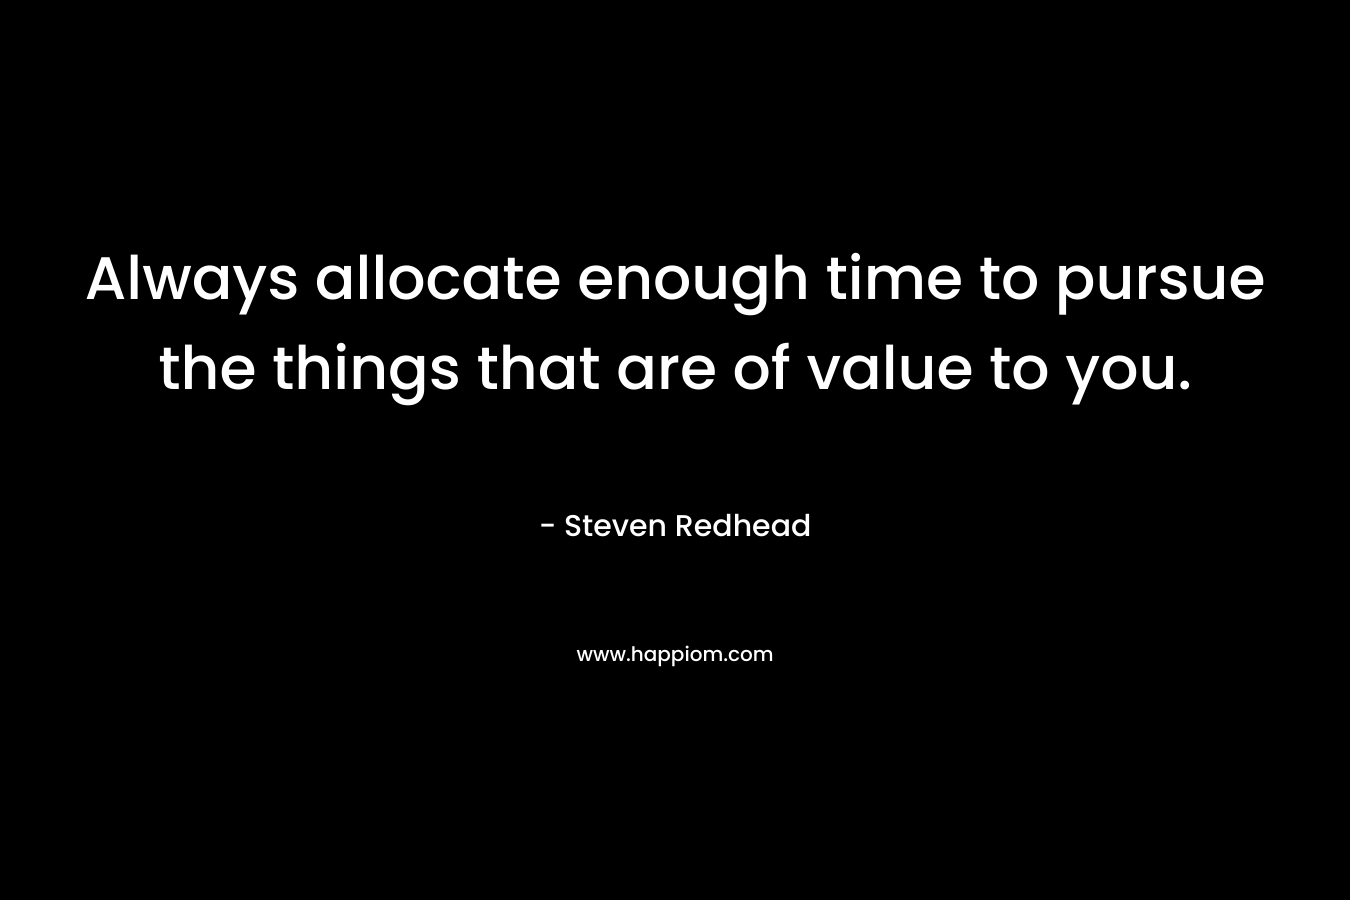 Always allocate enough time to pursue the things that are of value to you.